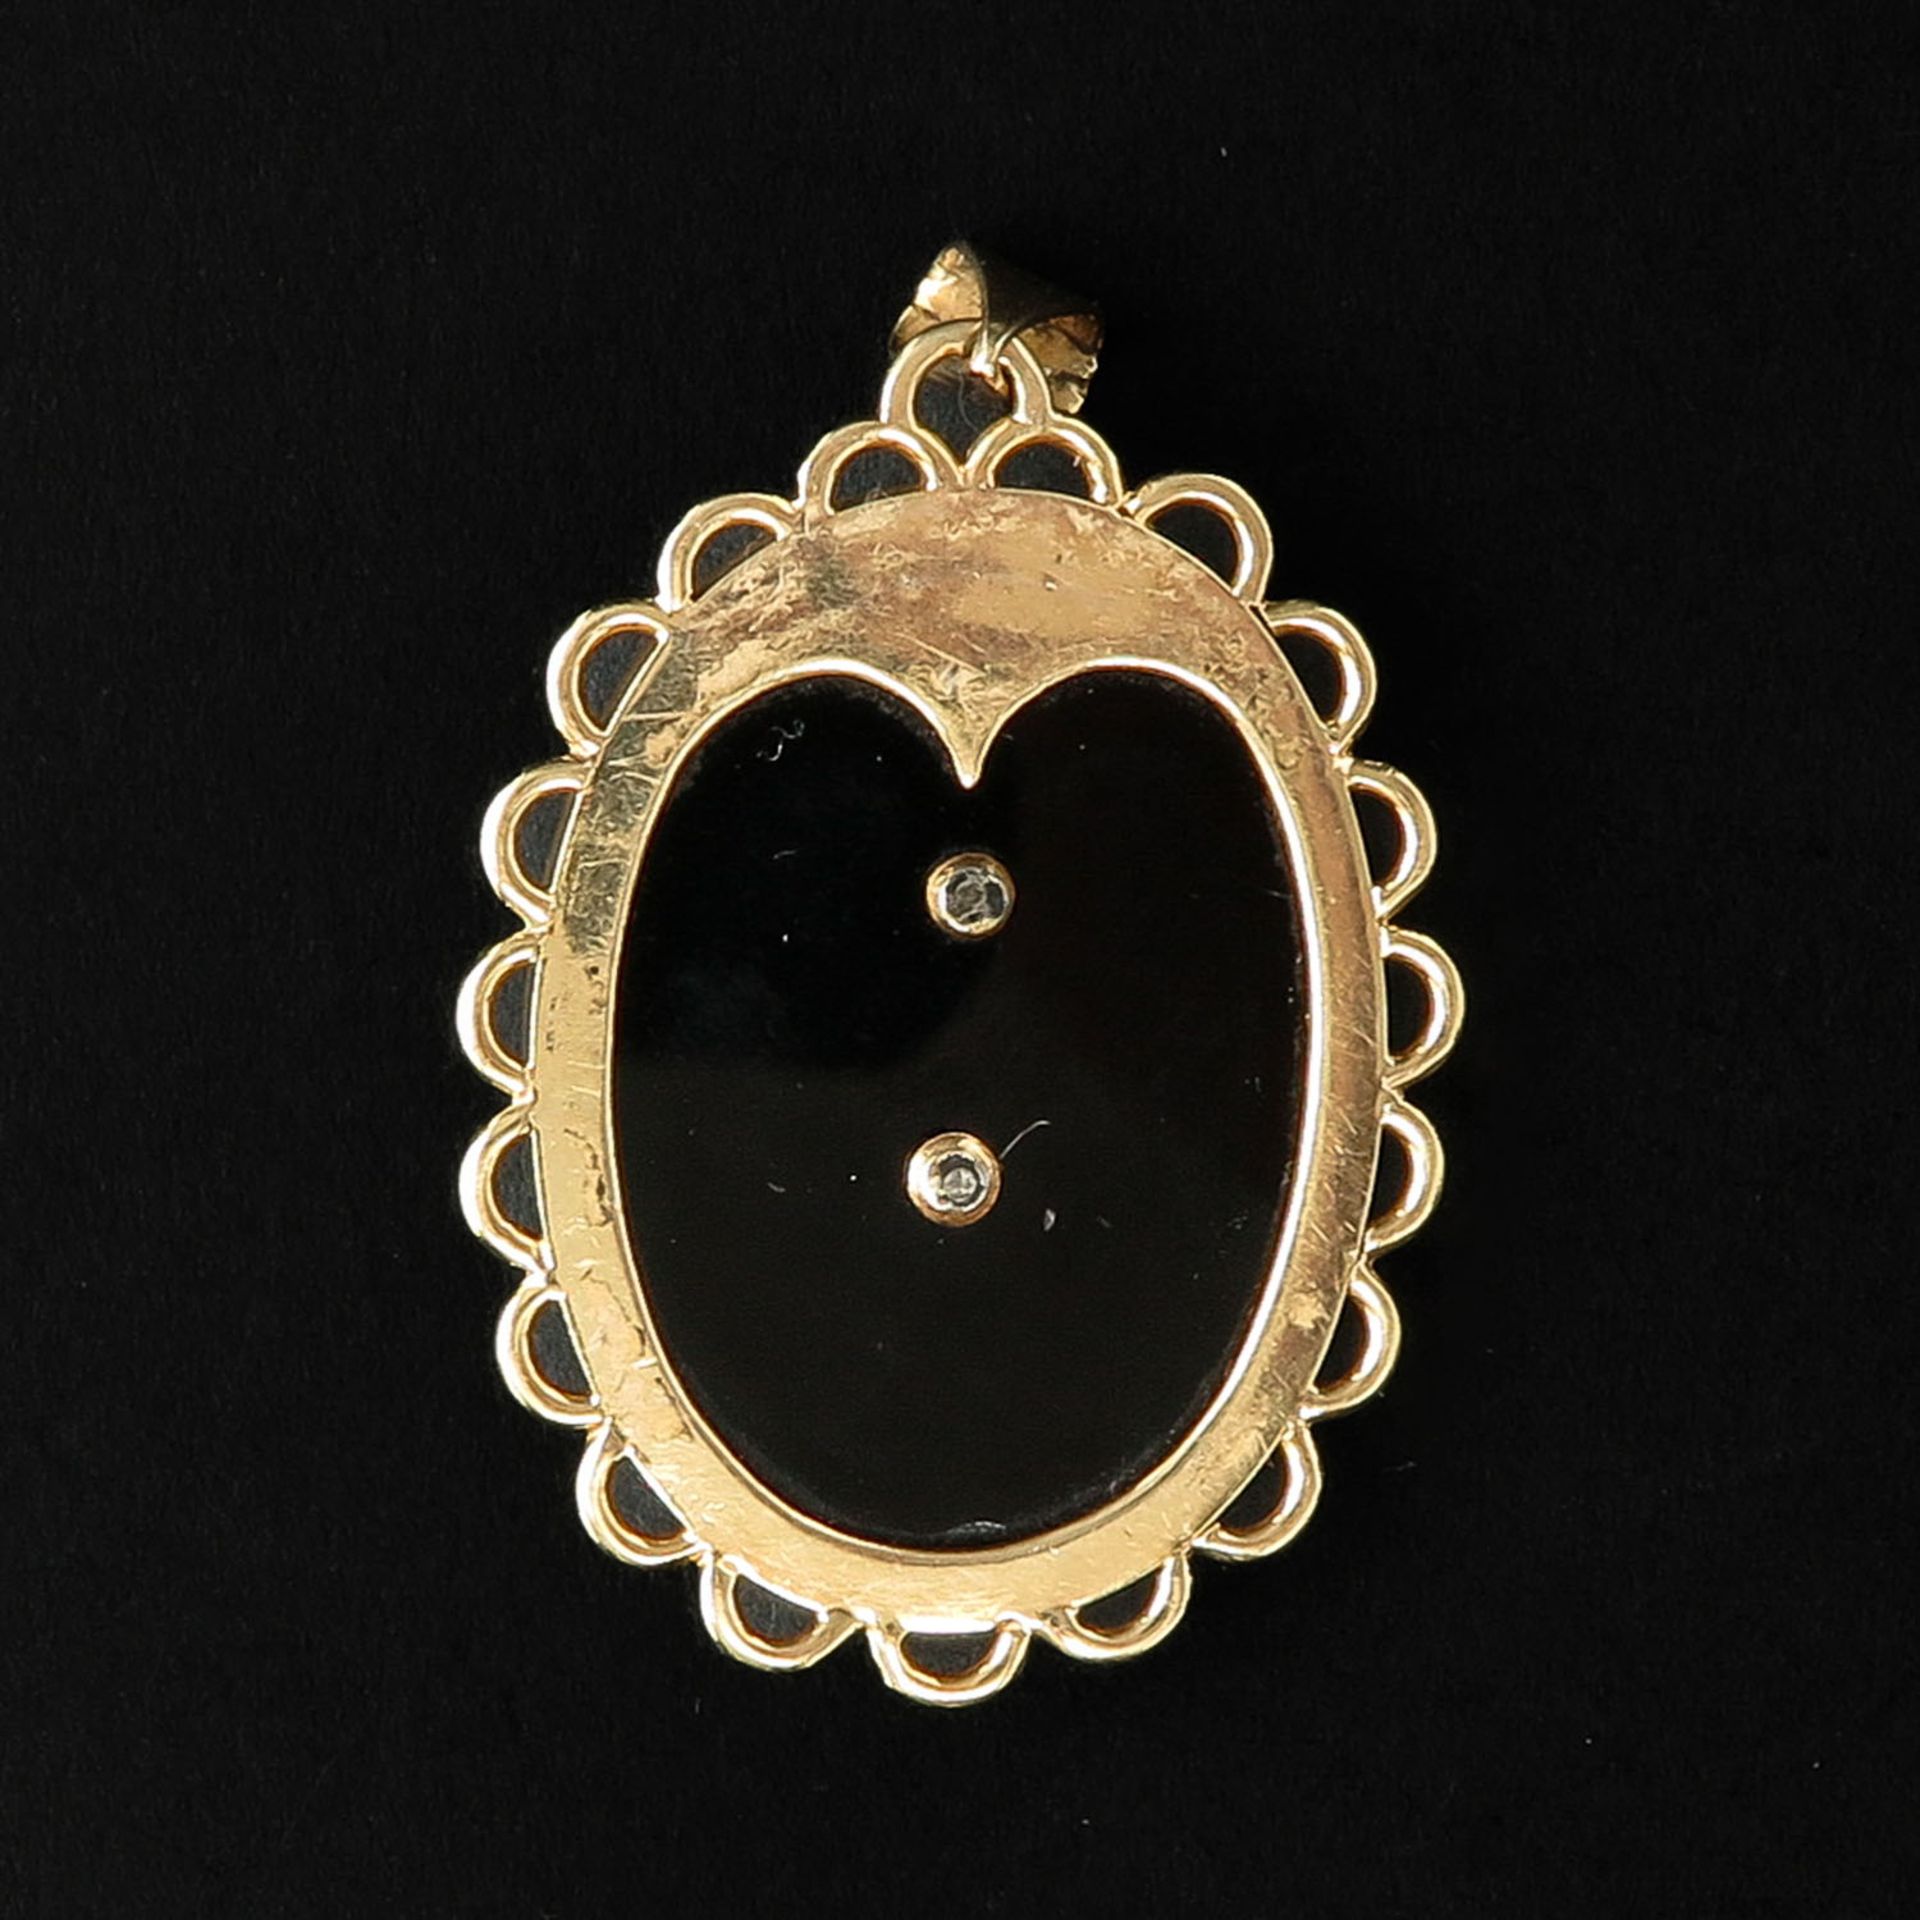 A Onyx and Diamond Brooch - Image 2 of 3